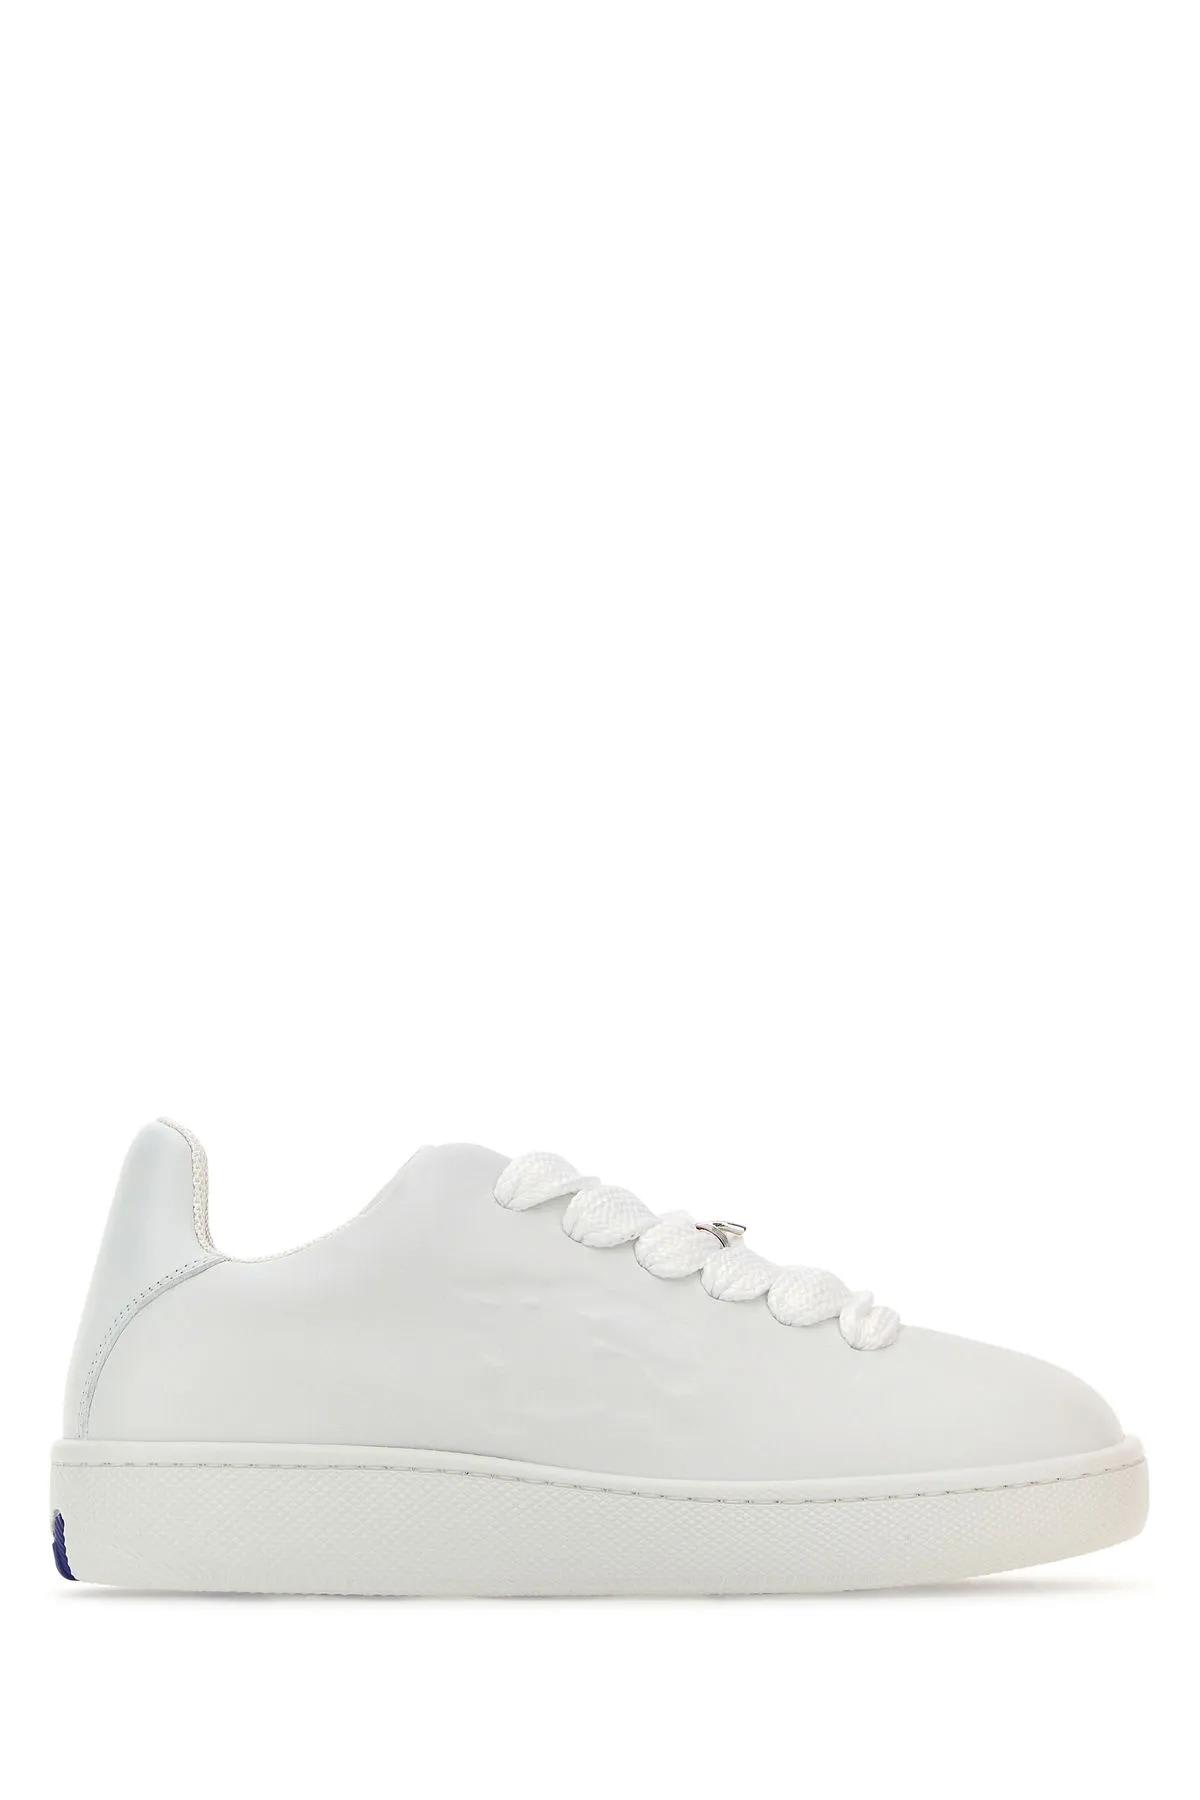 Shop Burberry White Leather Box Sneakers